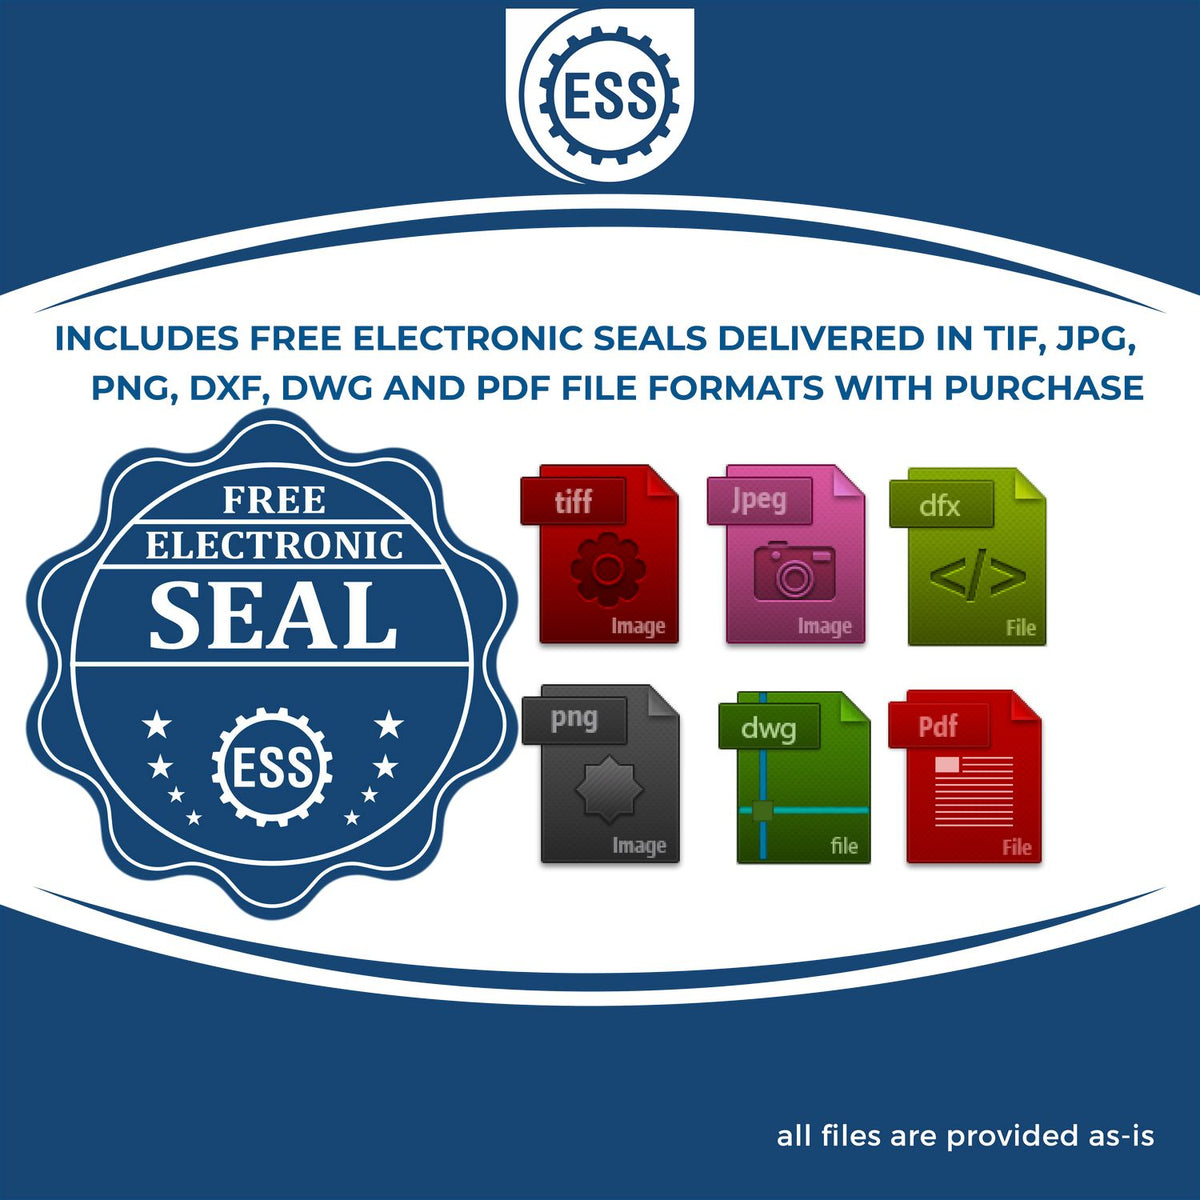 An infographic for the free electronic seal for the Gift Pennsylvania Geologist Seal illustrating the different file type icons such as DXF, DWG, TIF, JPG and PNG.